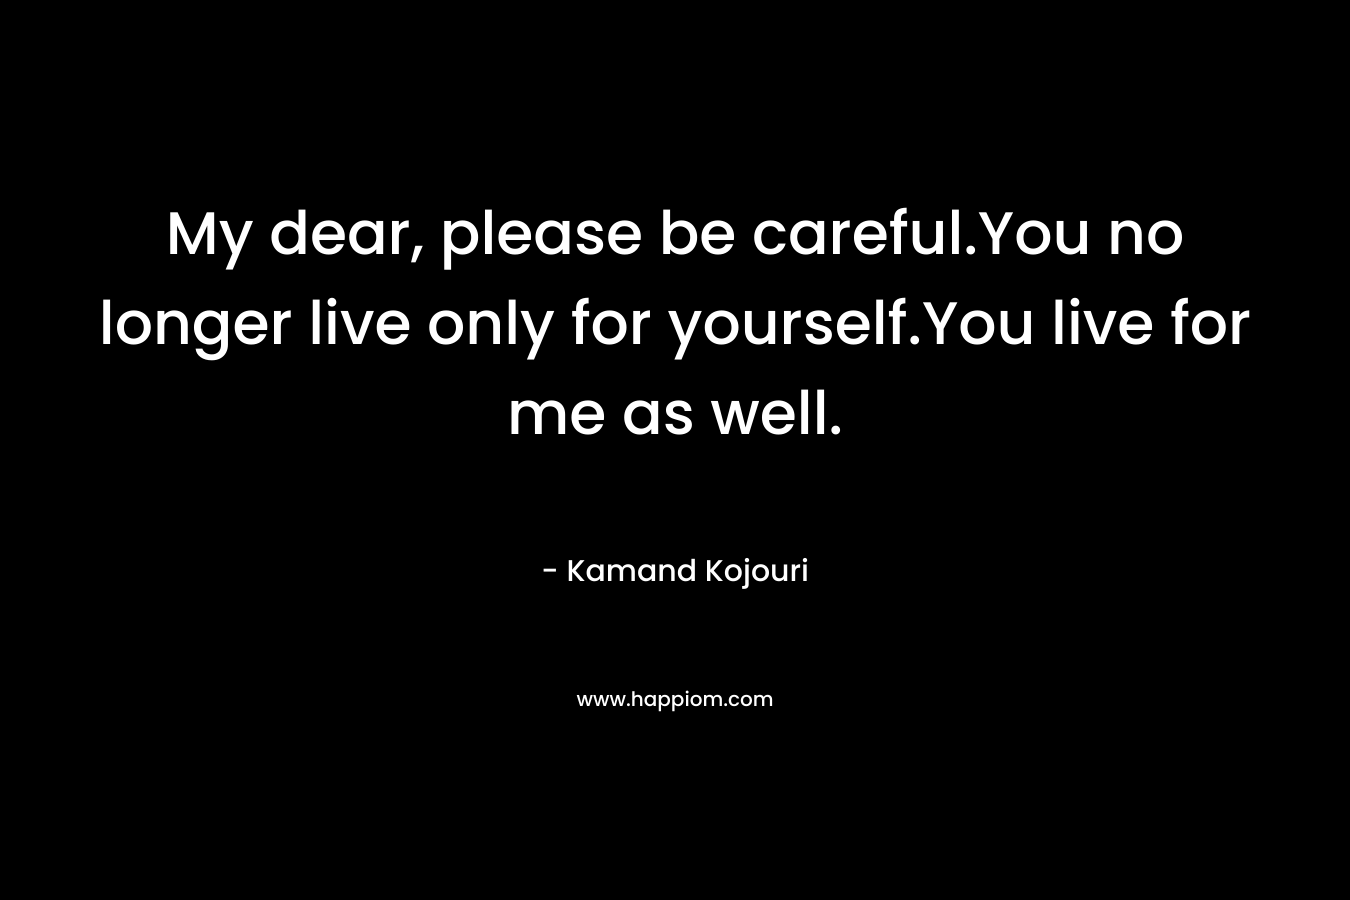 My dear, please be careful.You no longer live only for yourself.You live for me as well. – Kamand Kojouri